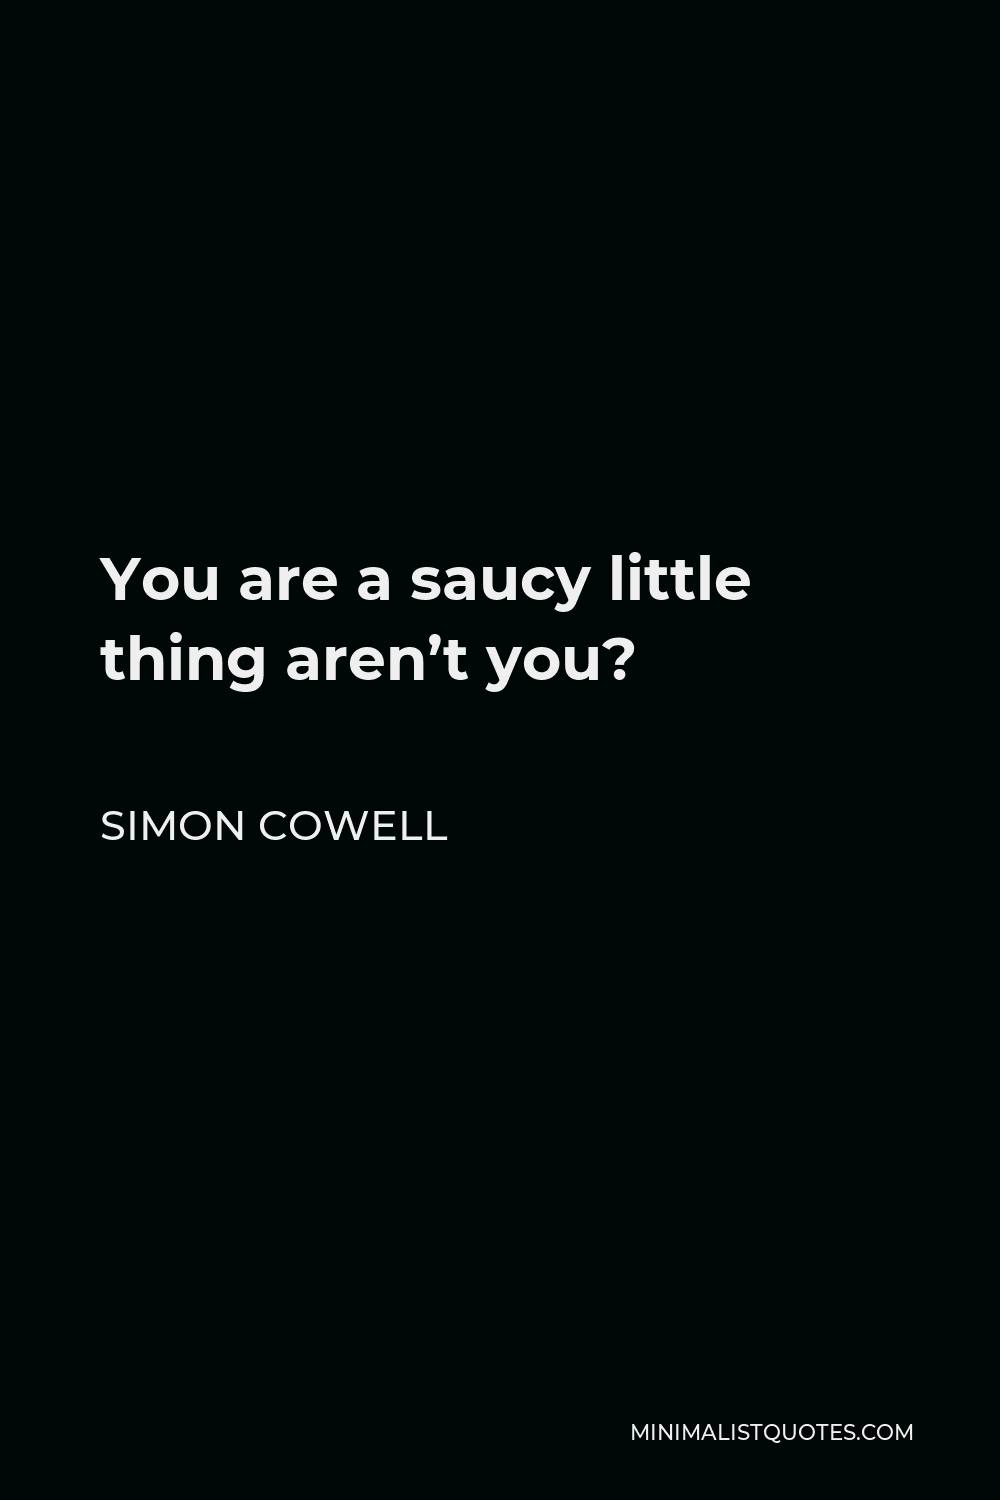 Simon Cowell Quote - You are a saucy little thing aren’t you?